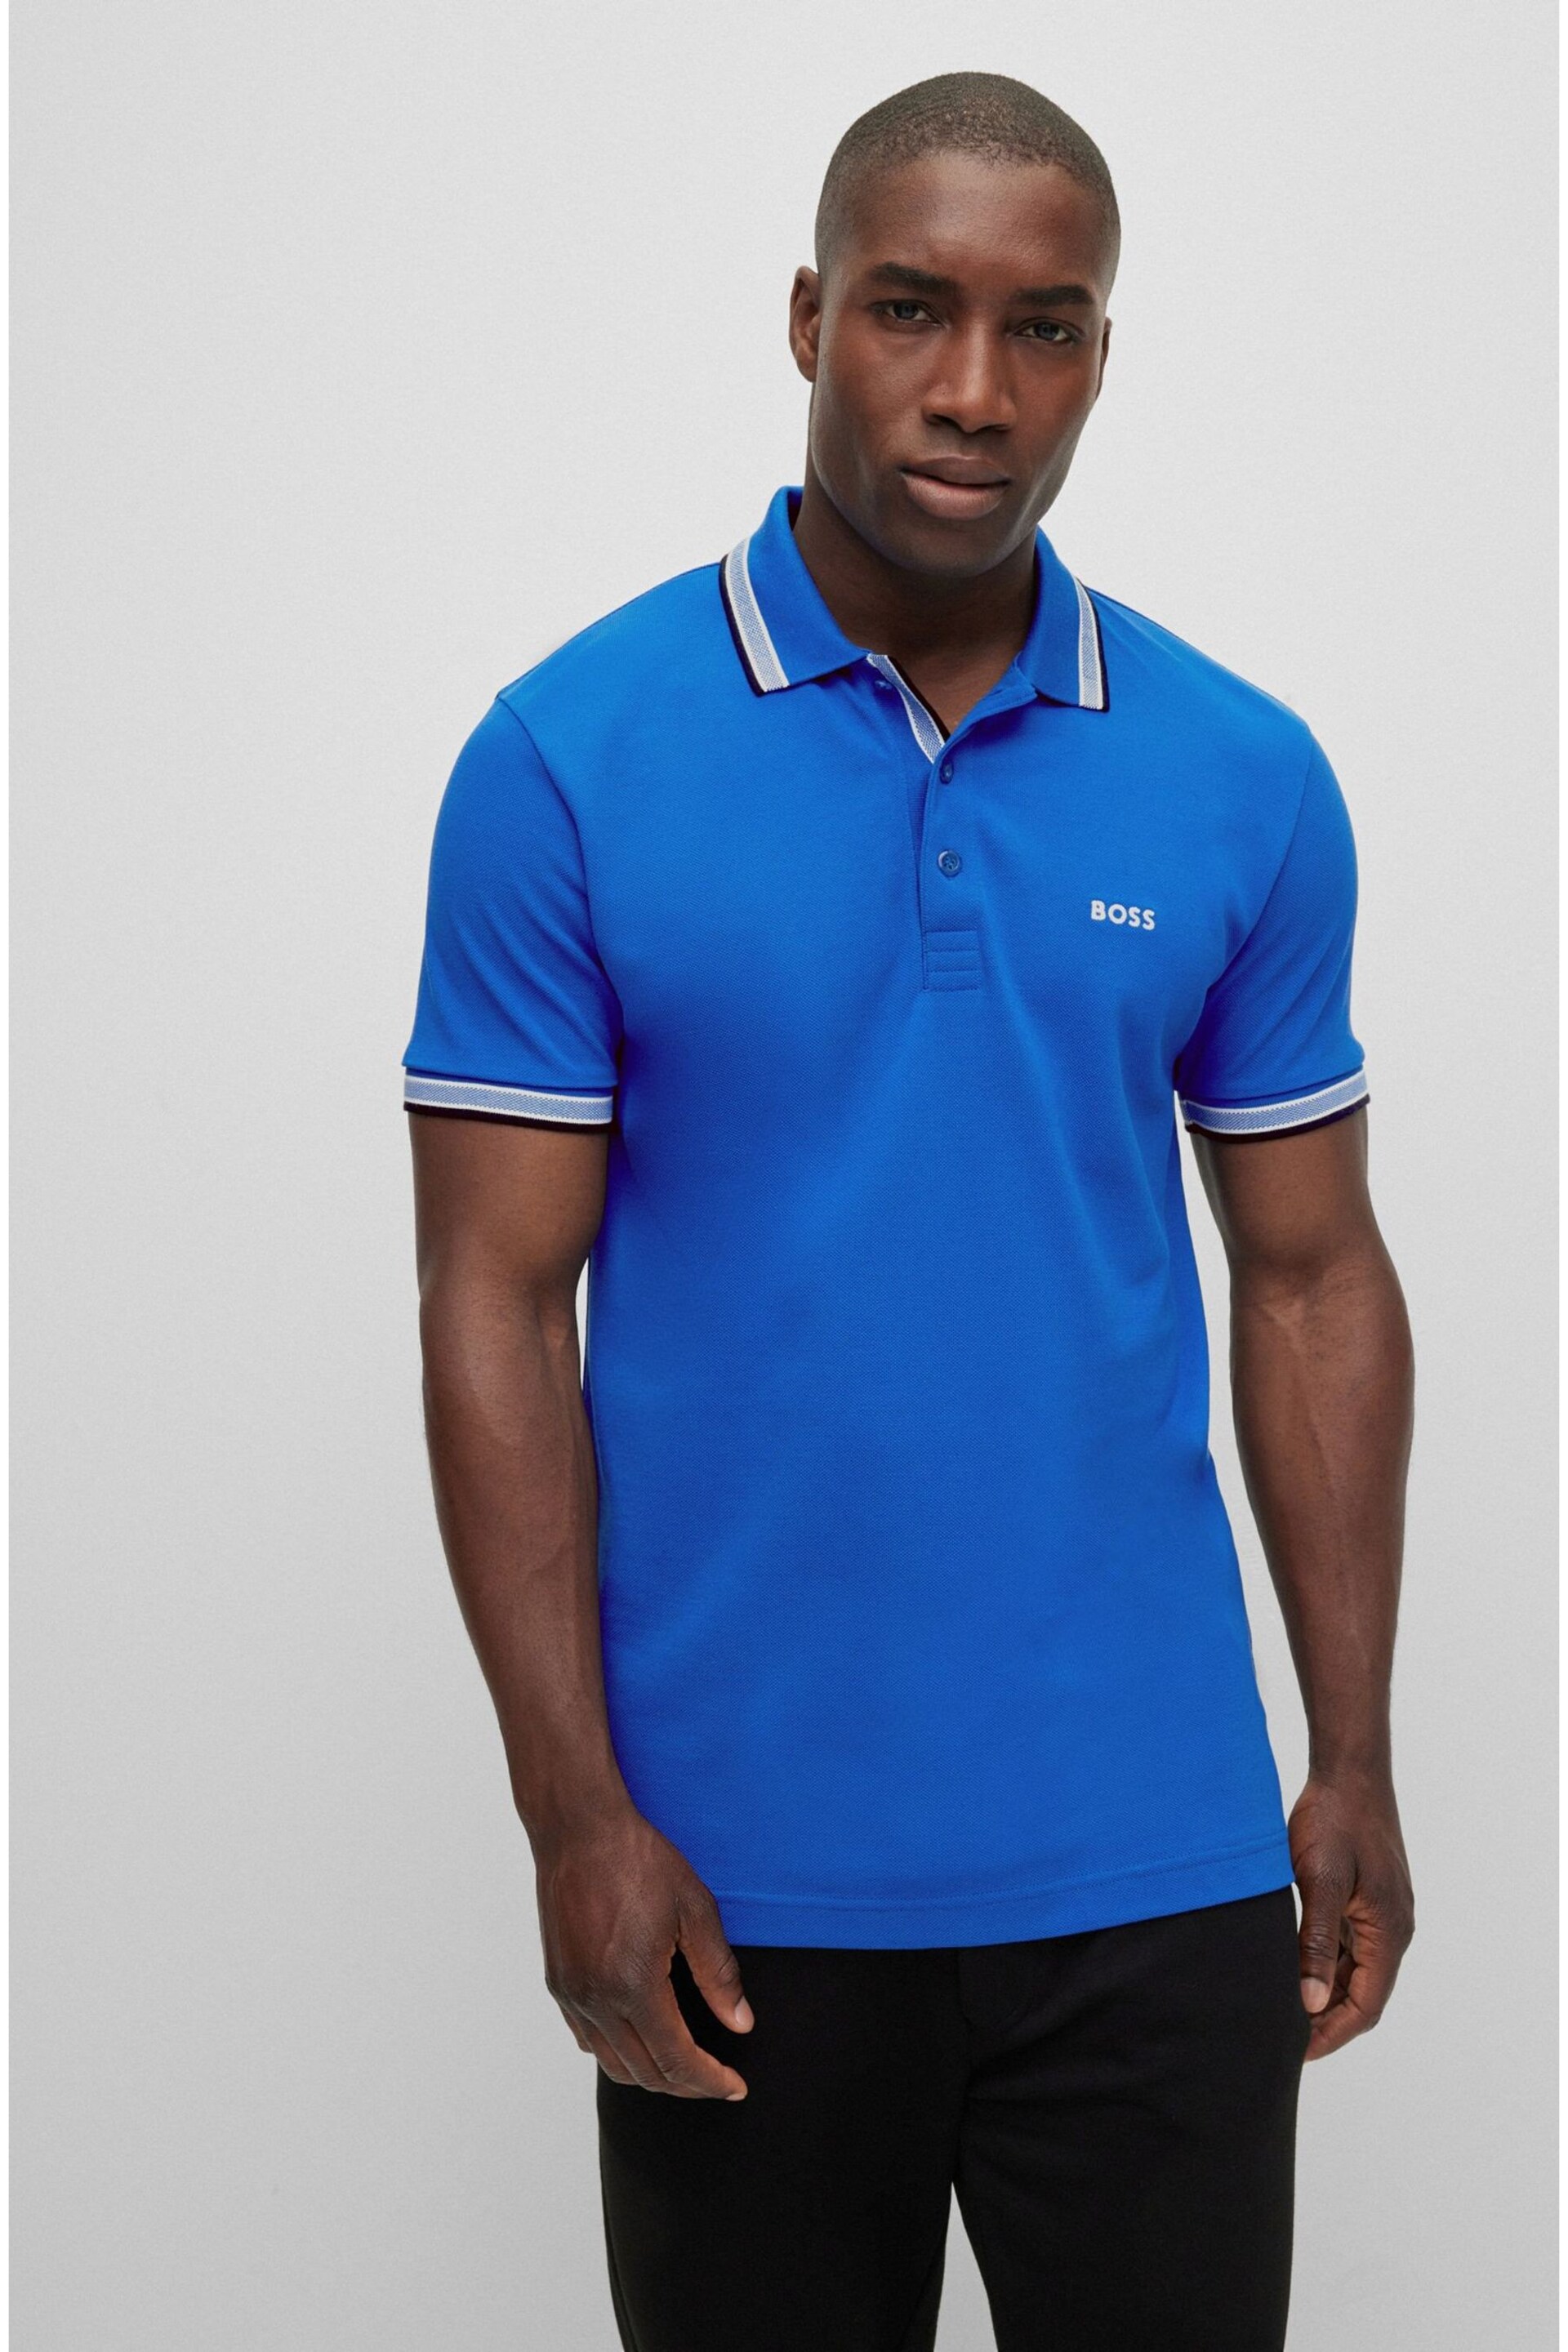 BOSS Bright Blue/Blue Tipping Paddy Polo Pink Cream Shirt - Image 1 of 5